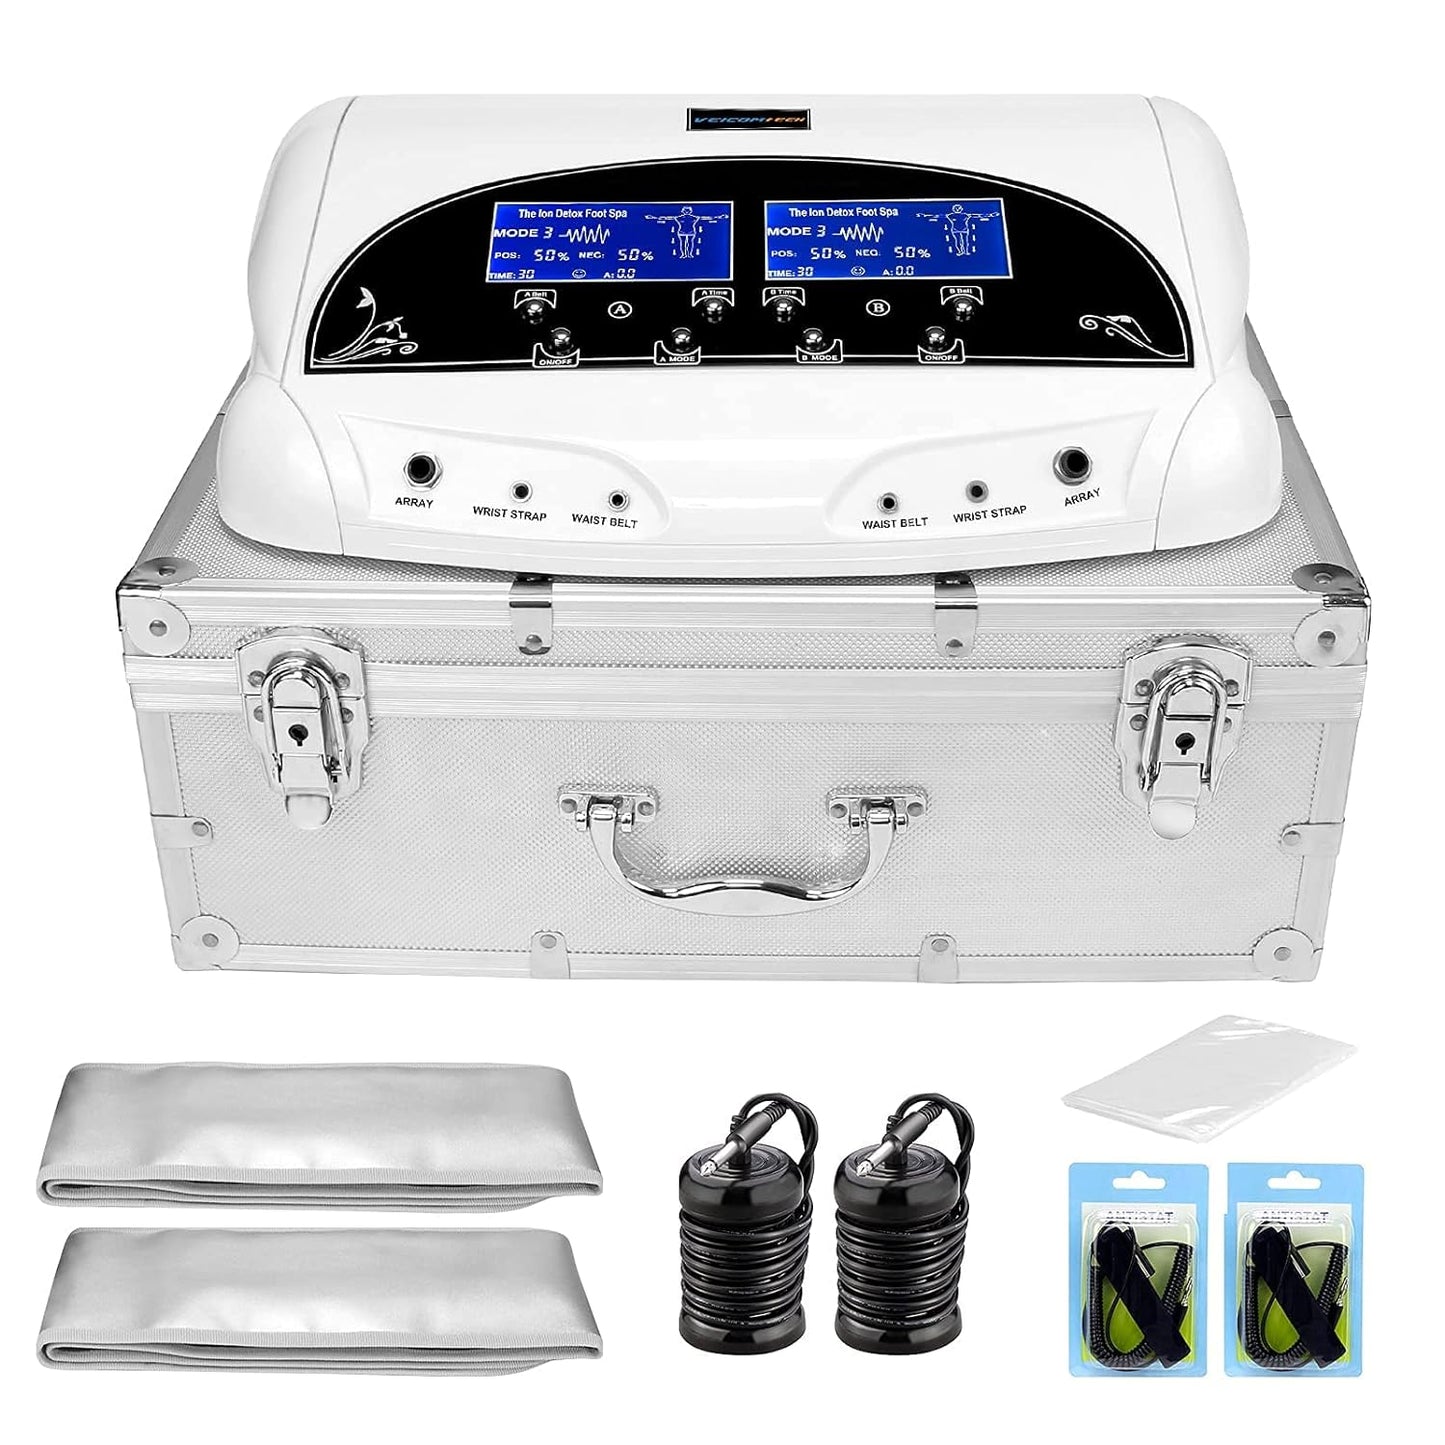 Professional Foot Detox Machine, Ionic Ion Detox Foot Bath Spa Cleanse Detoxification Machine with 2 Waist Belts, 2 Arrays, 10 Liners and Aluminum Box